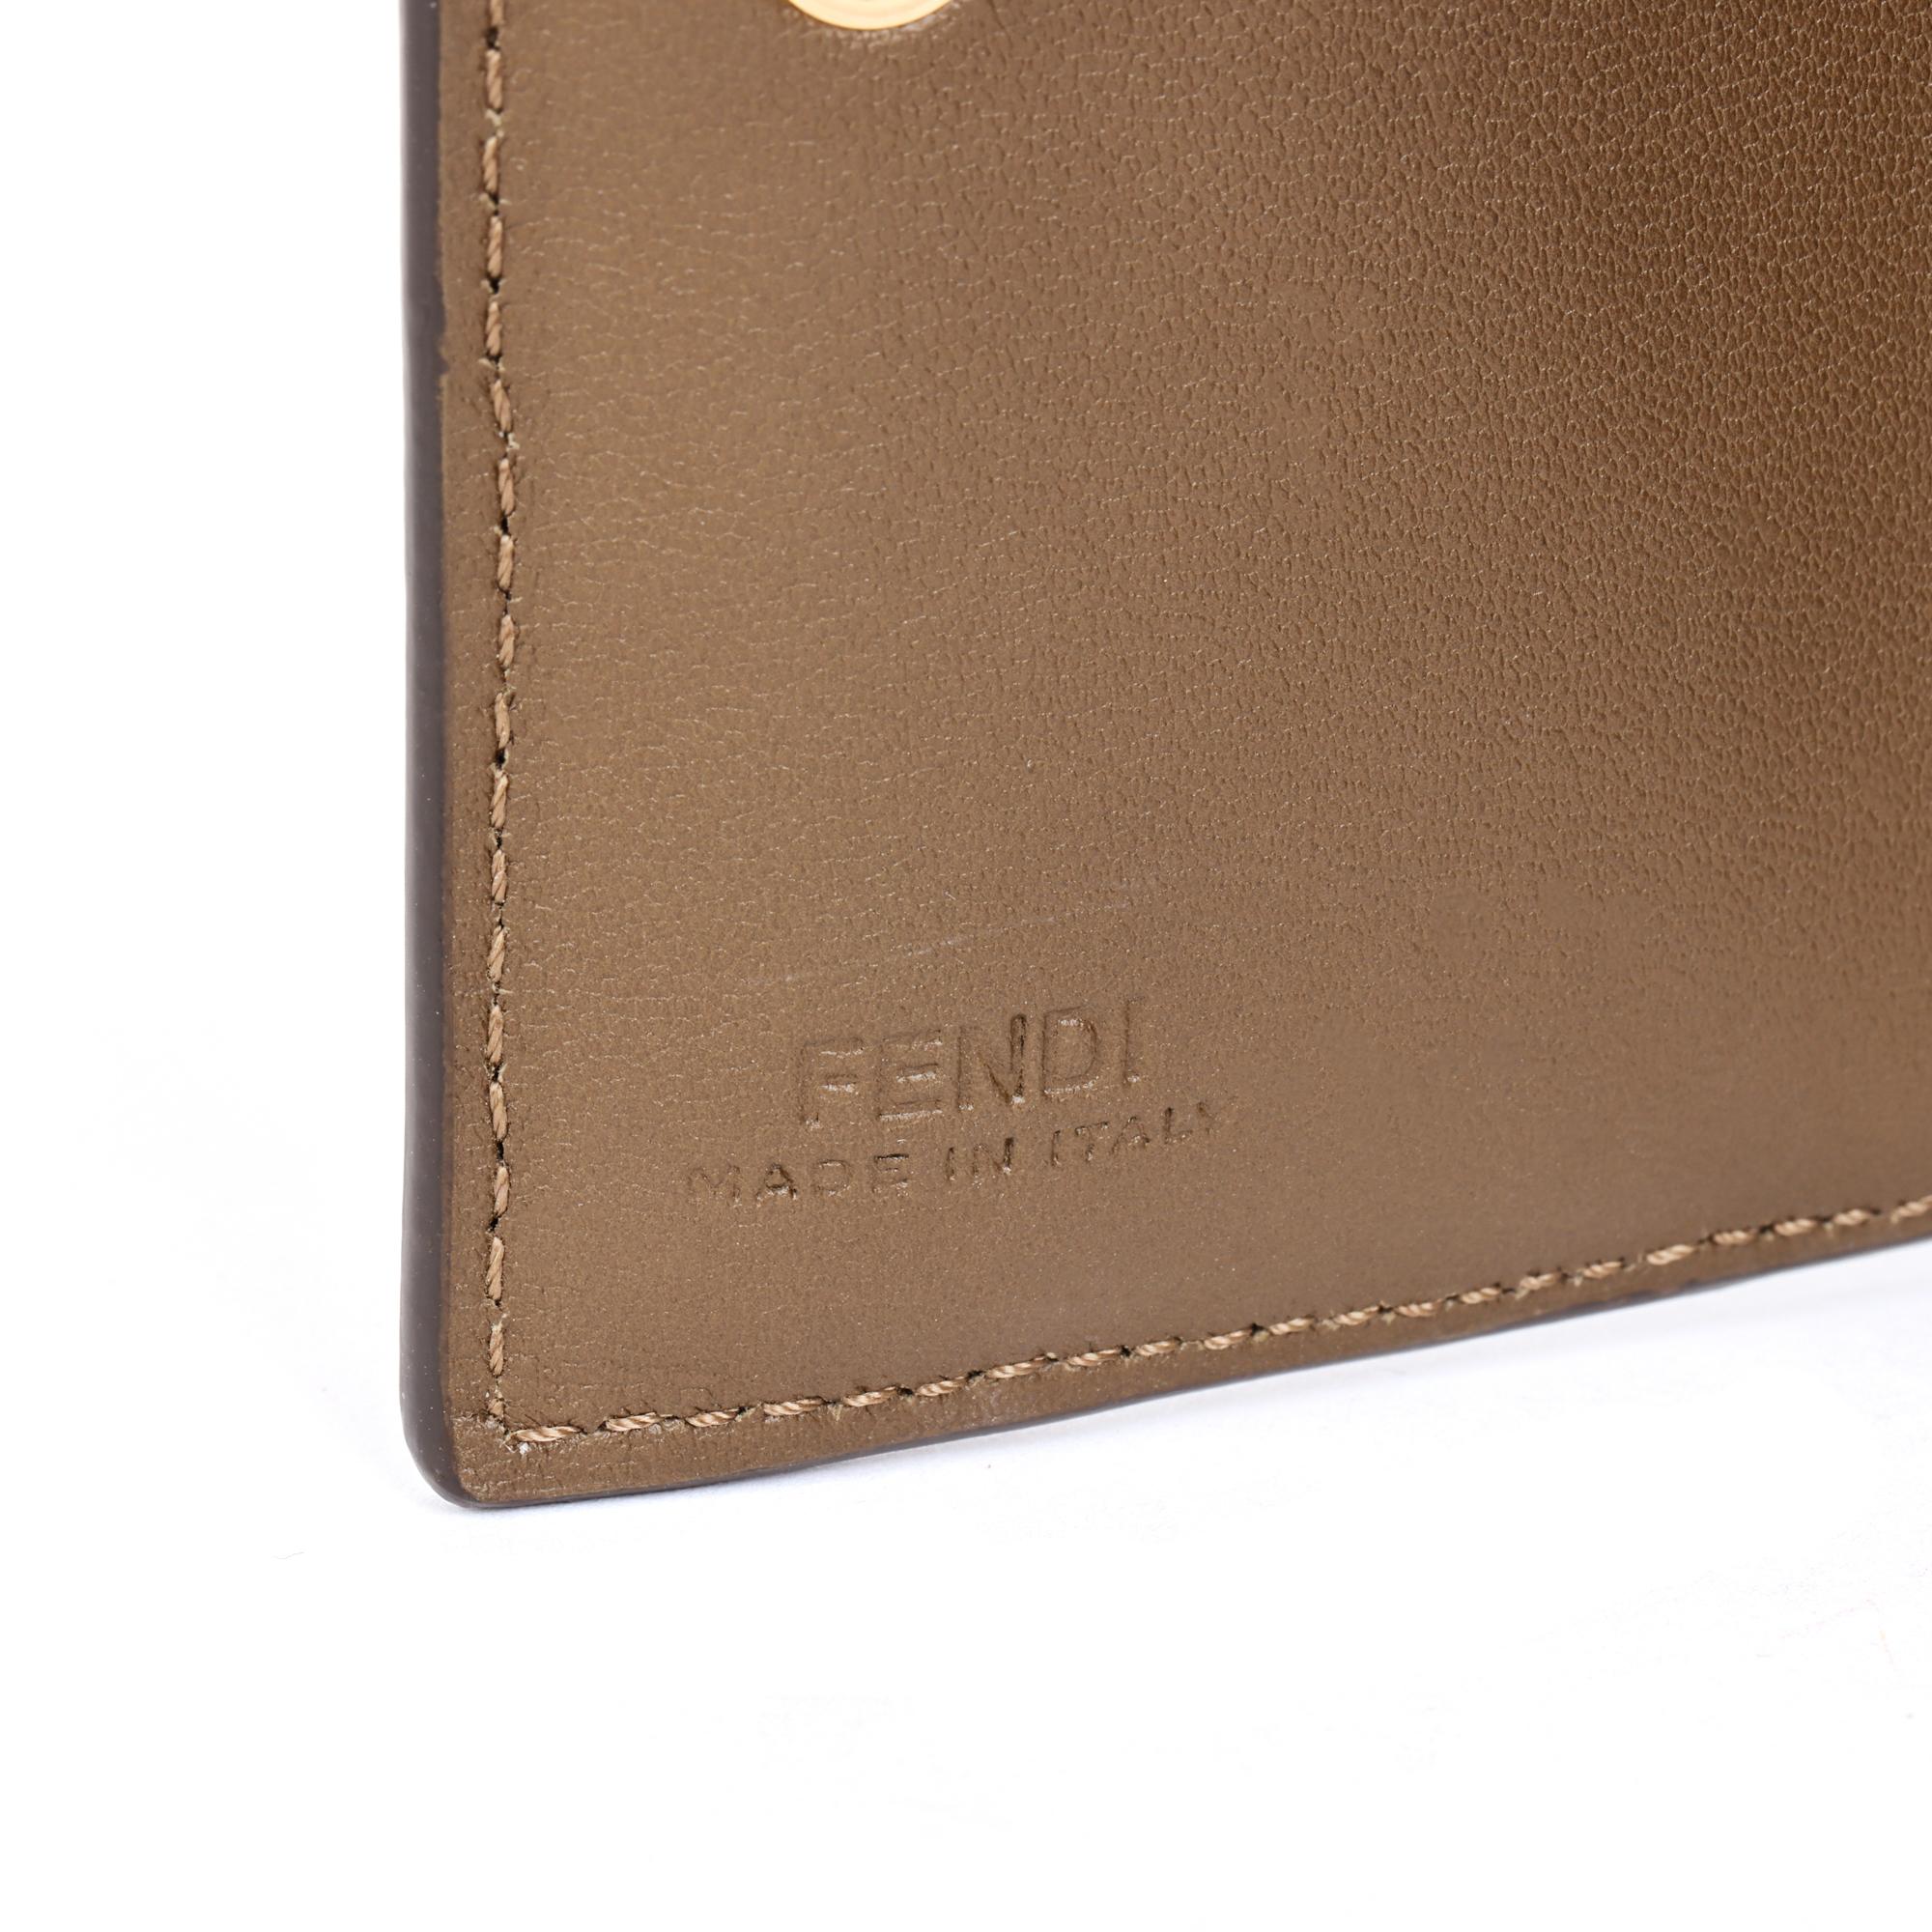 Fendi Olive Nappa Leather Small Wallet  In Excellent Condition For Sale In Bishop's Stortford, Hertfordshire